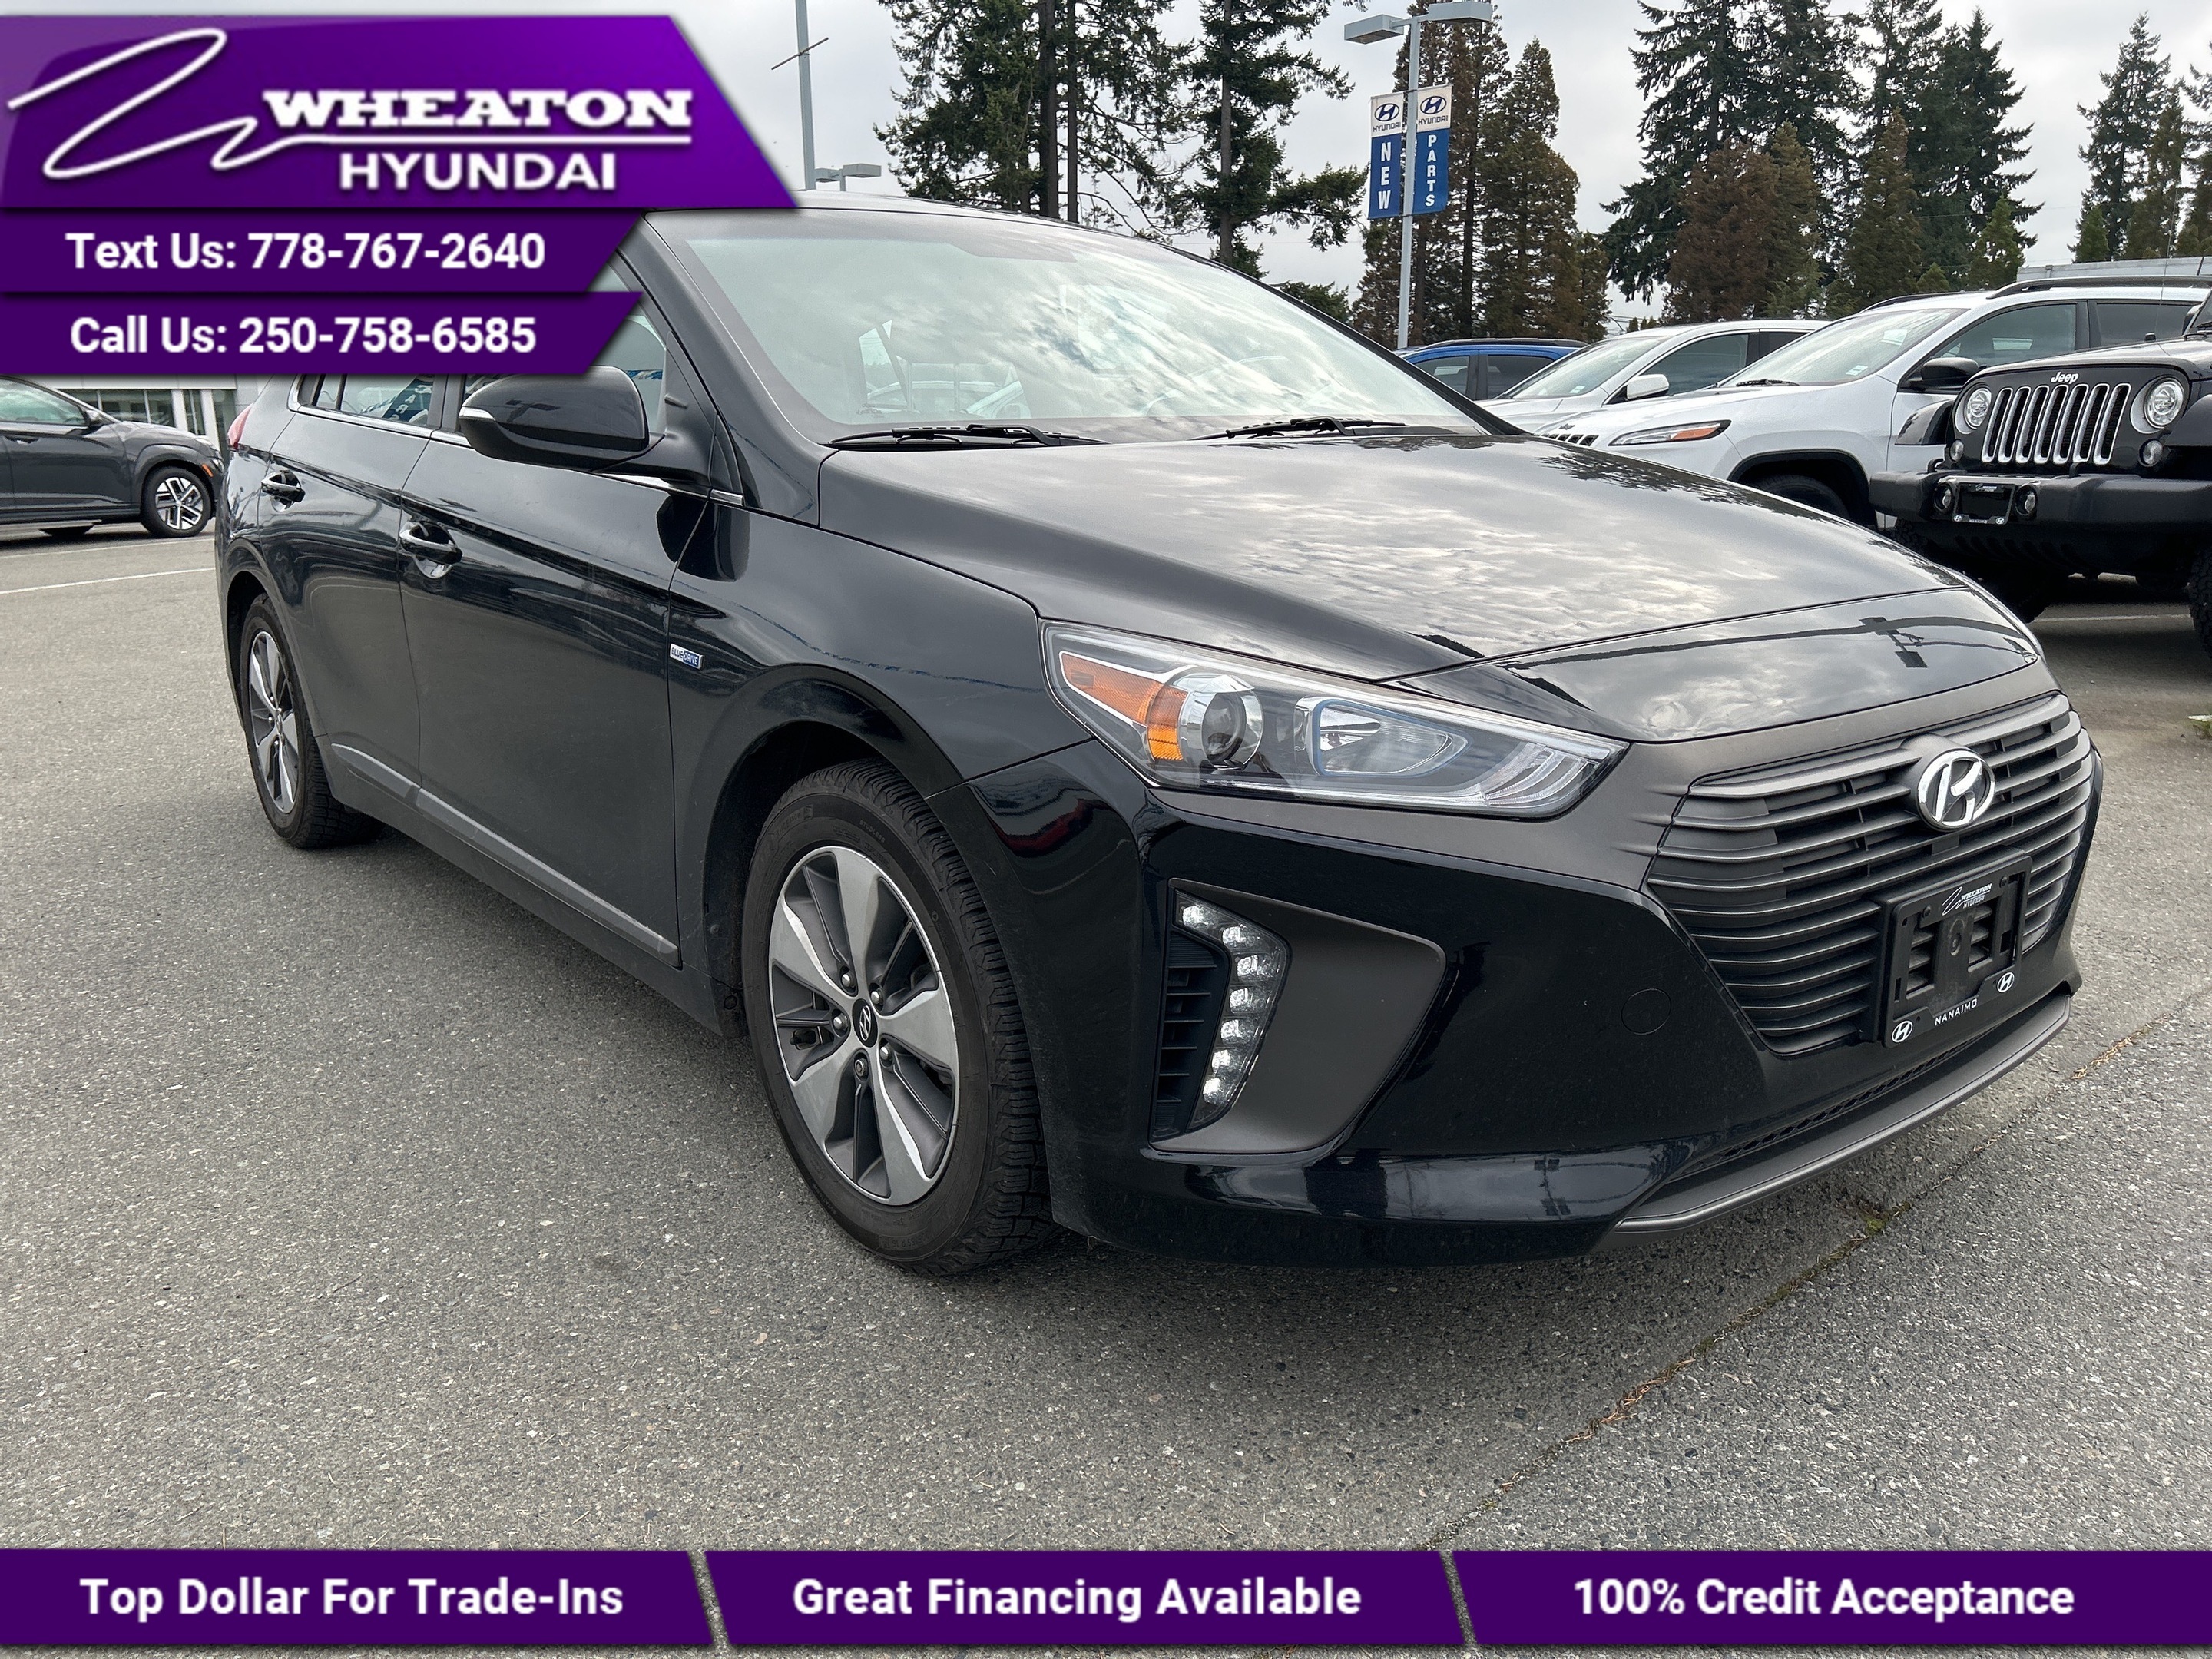 2019 Hyundai IONIQ Electric Plus Preferred, Certified, One Owner, No Accidents, Nav